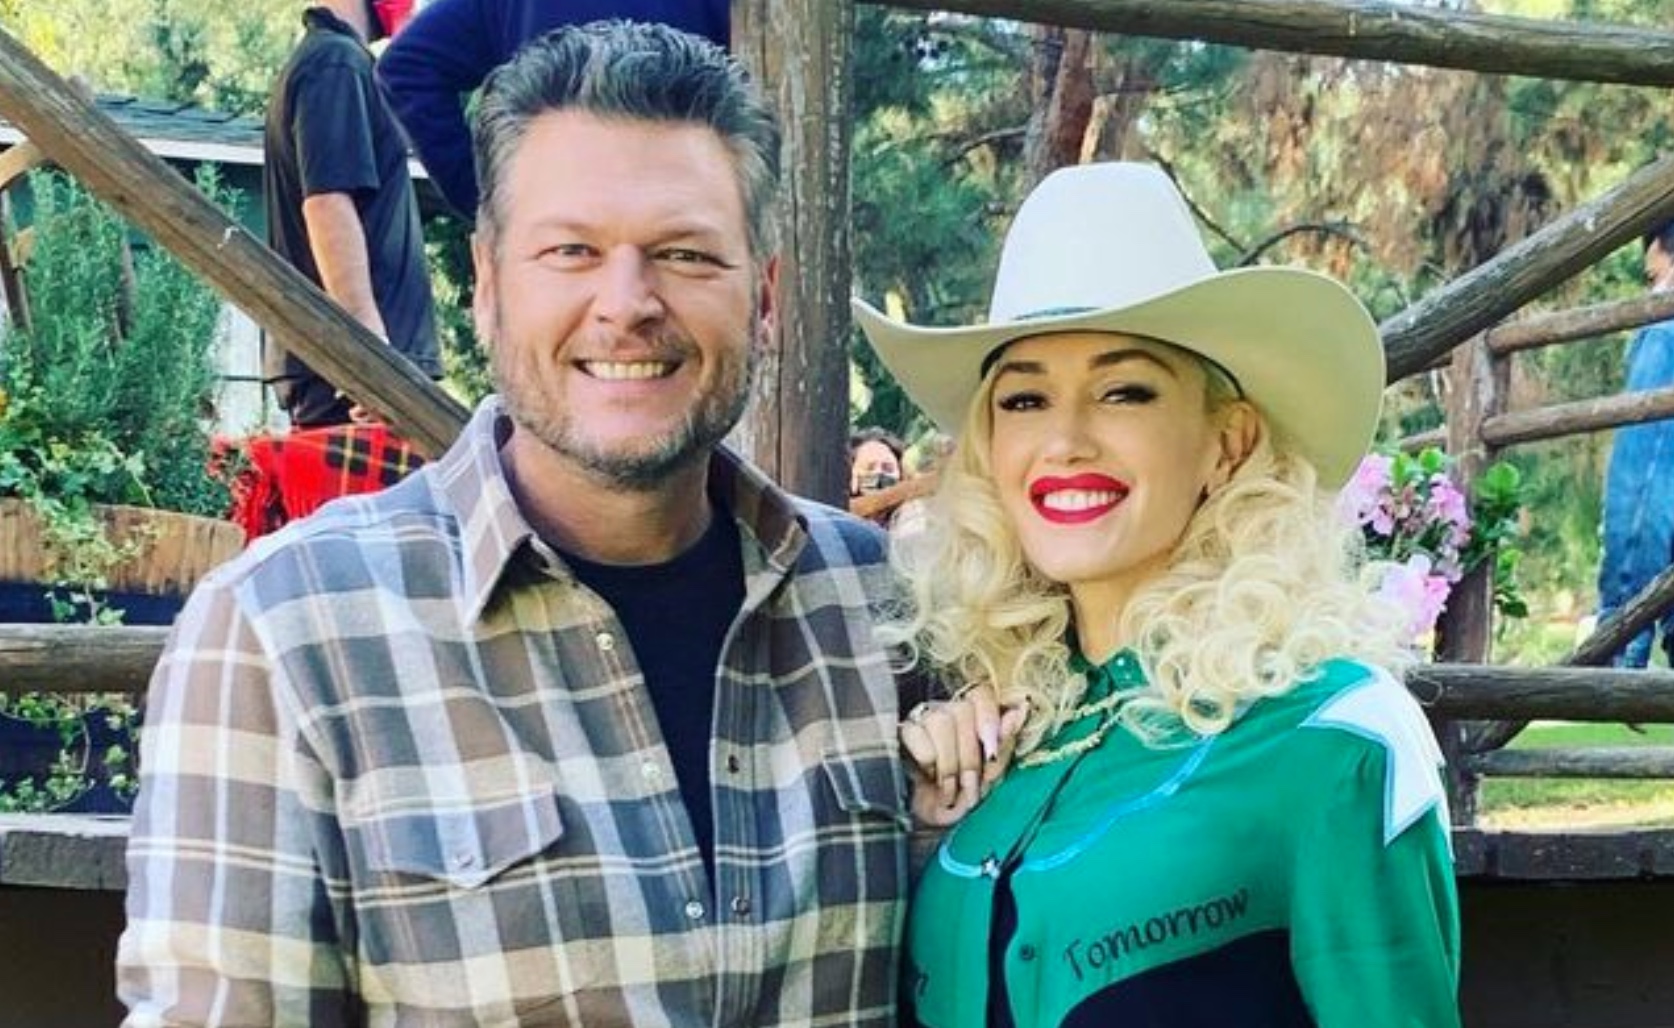 Gwen Stefani Honors Blake Shelton And Her 3 Son With Her Wedding Dress While Shelton Made Everyone Cry With His Surprise Wedding Gesture 